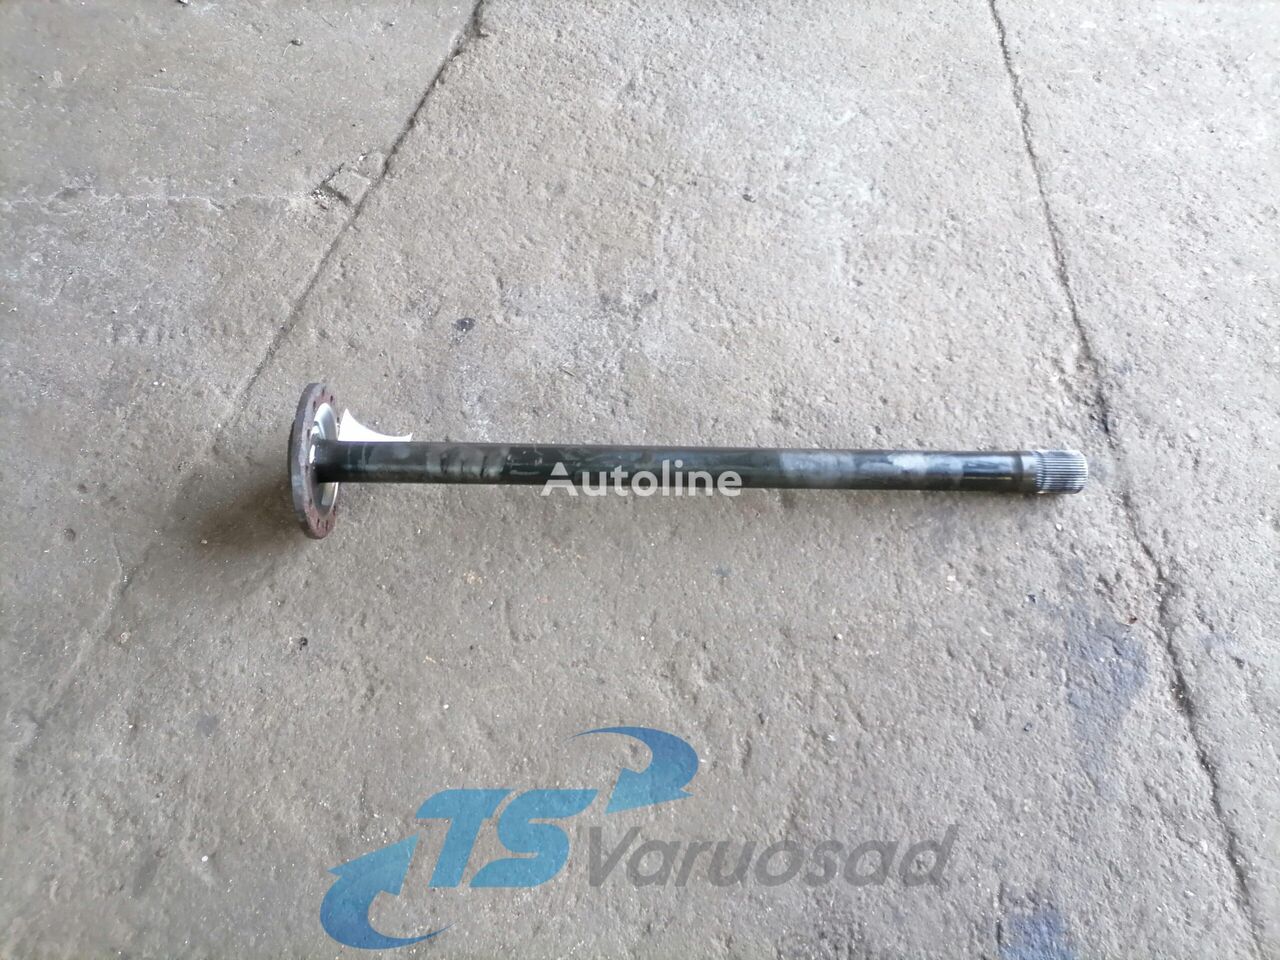 Volvo Drive shaft 20836838 primary shaft for Volvo FM9 truck tractor